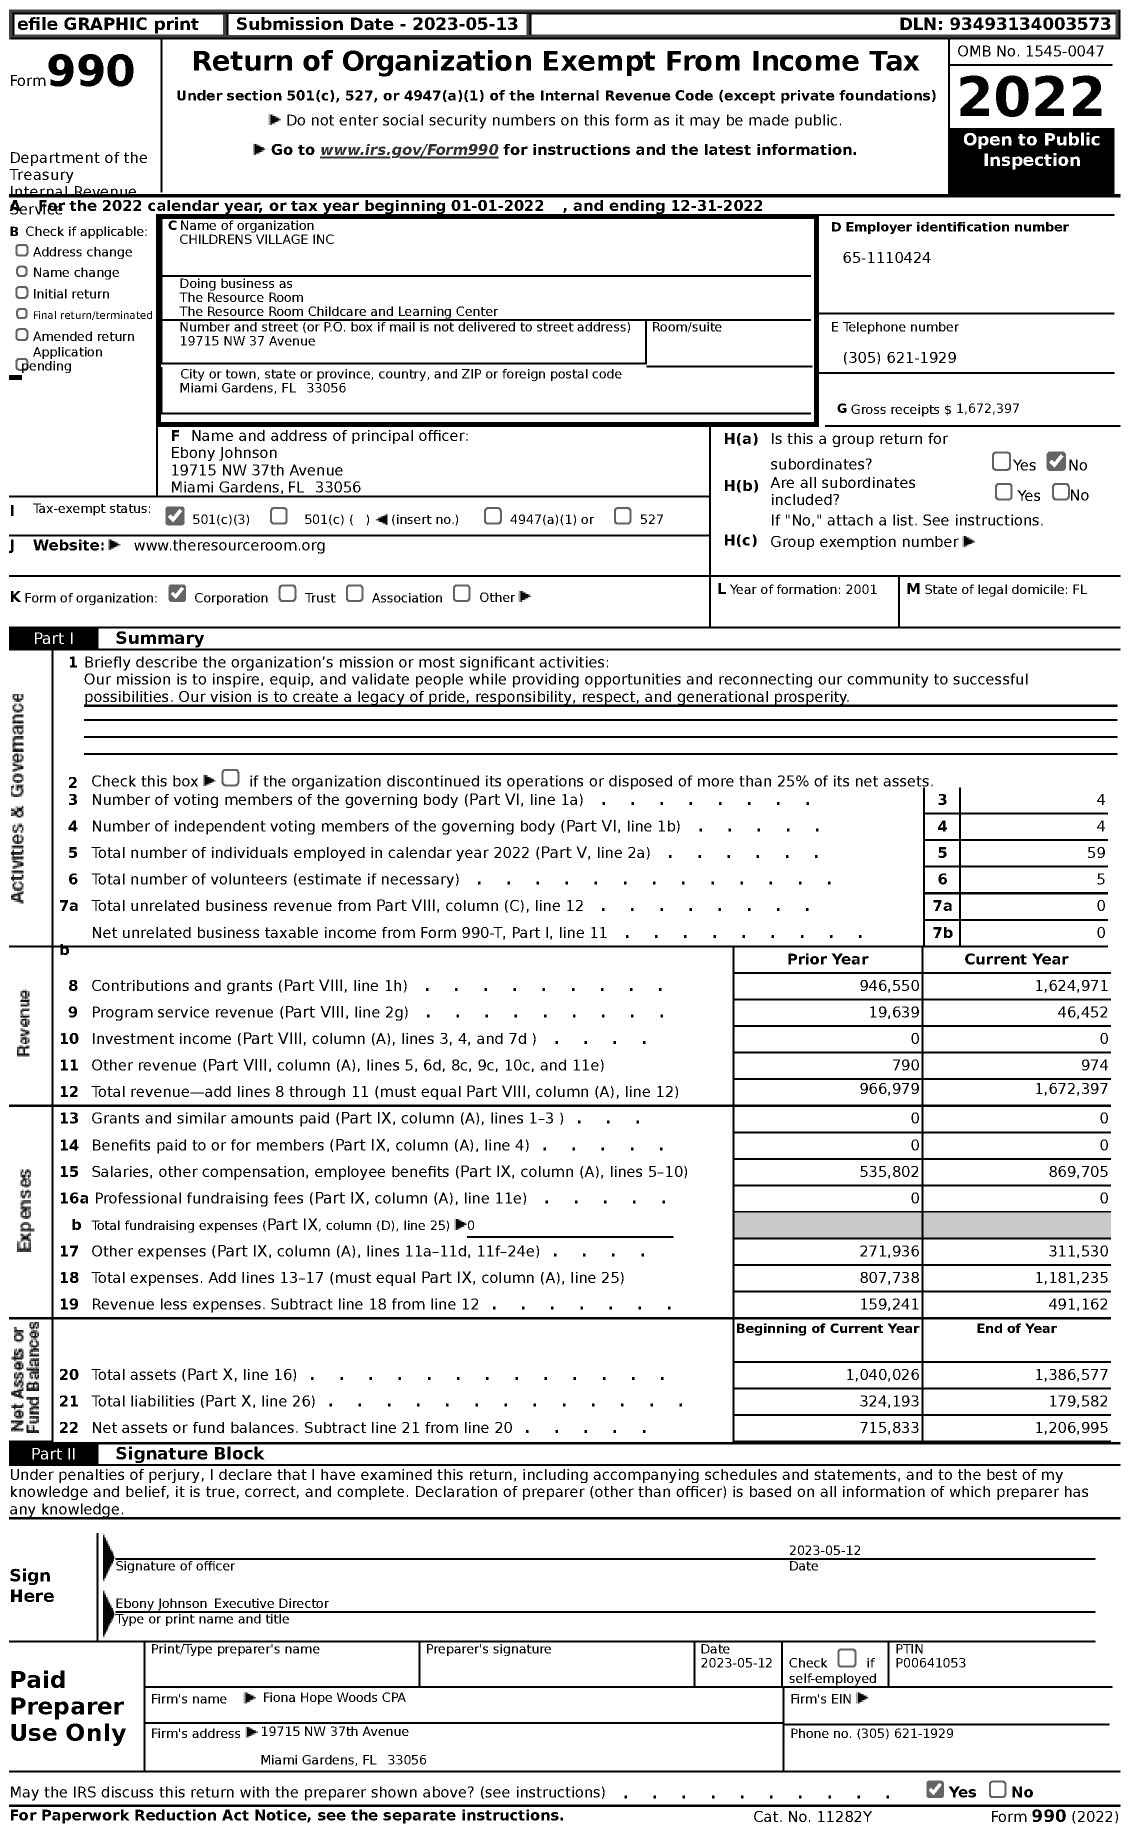 Image of first page of 2022 Form 990 for The Resource Room The Resource Room Childcare and Learning Center